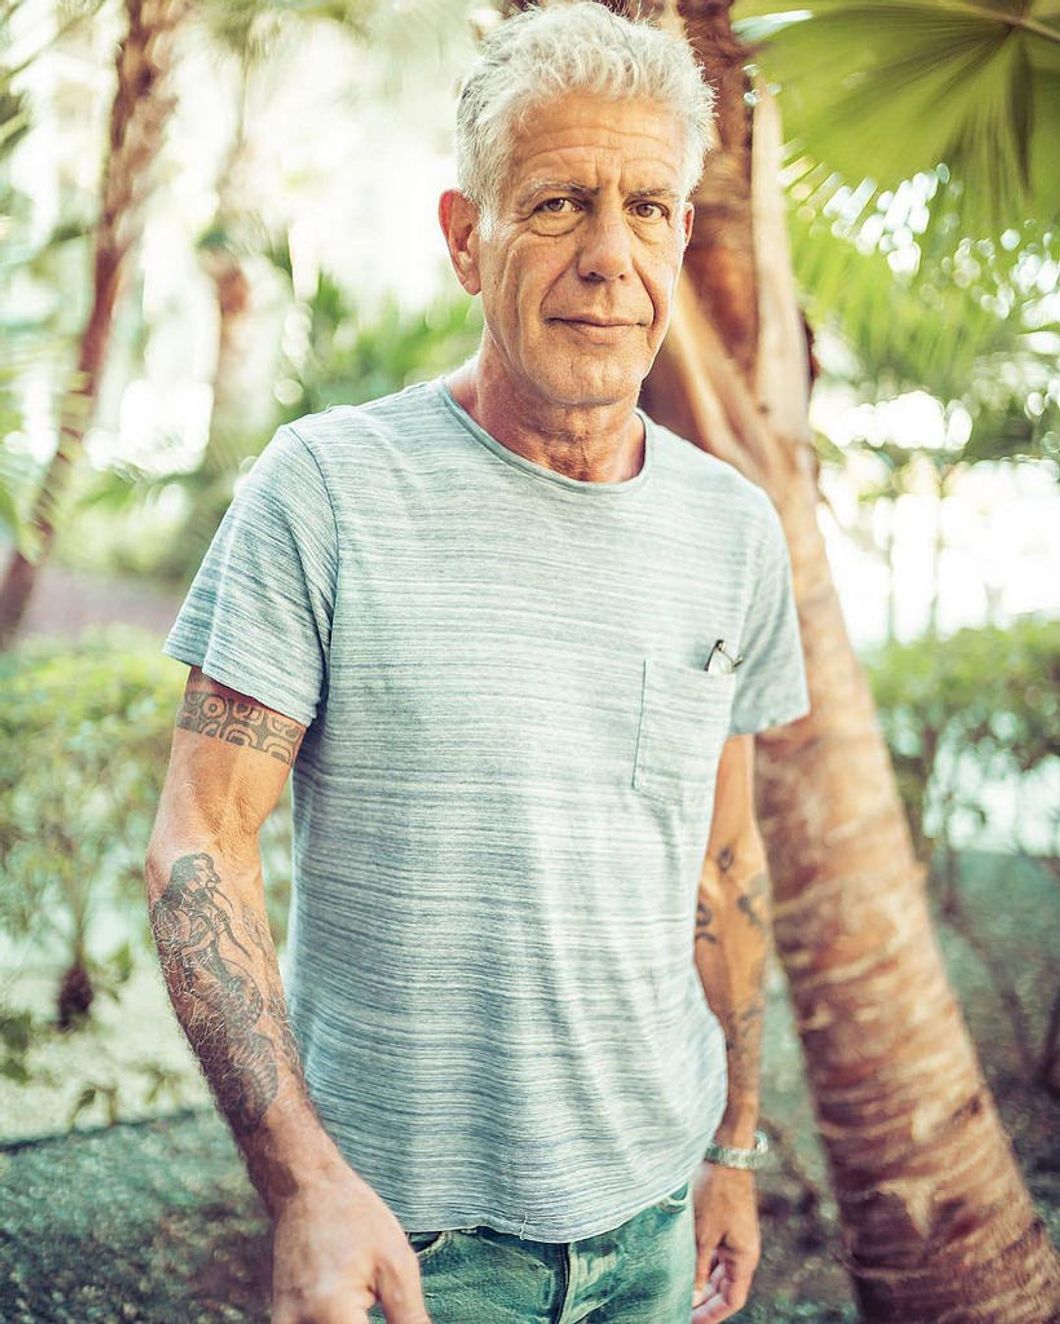 Anthony Bourdain Died 5 Months Ago And I'm Still Not Over It